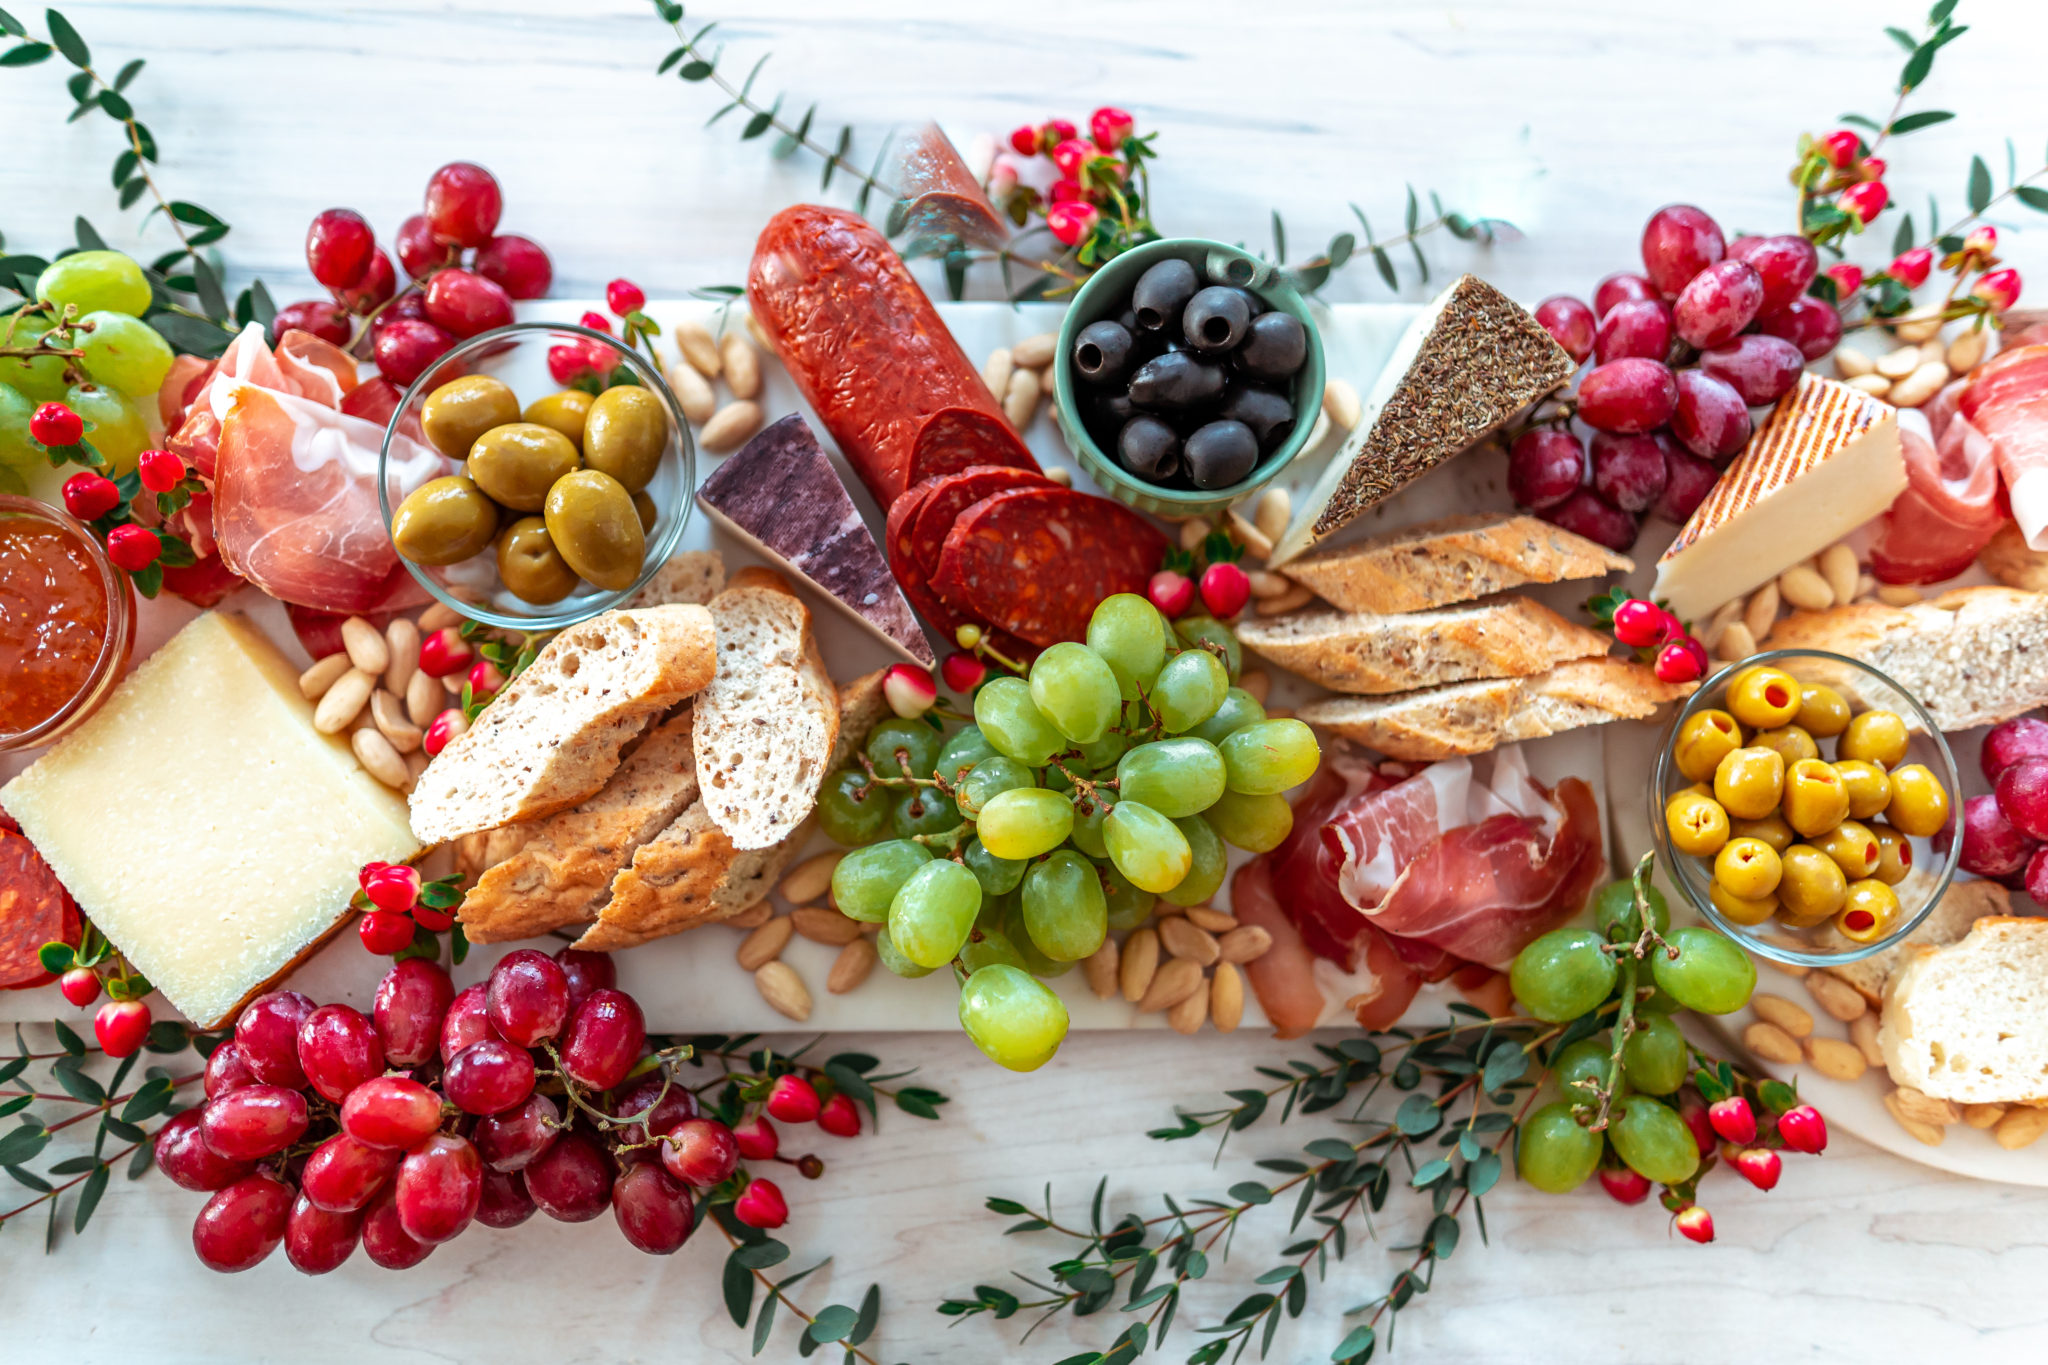 Spanish Charcuterie Board with Olives from Spain - Amidst the Chaos